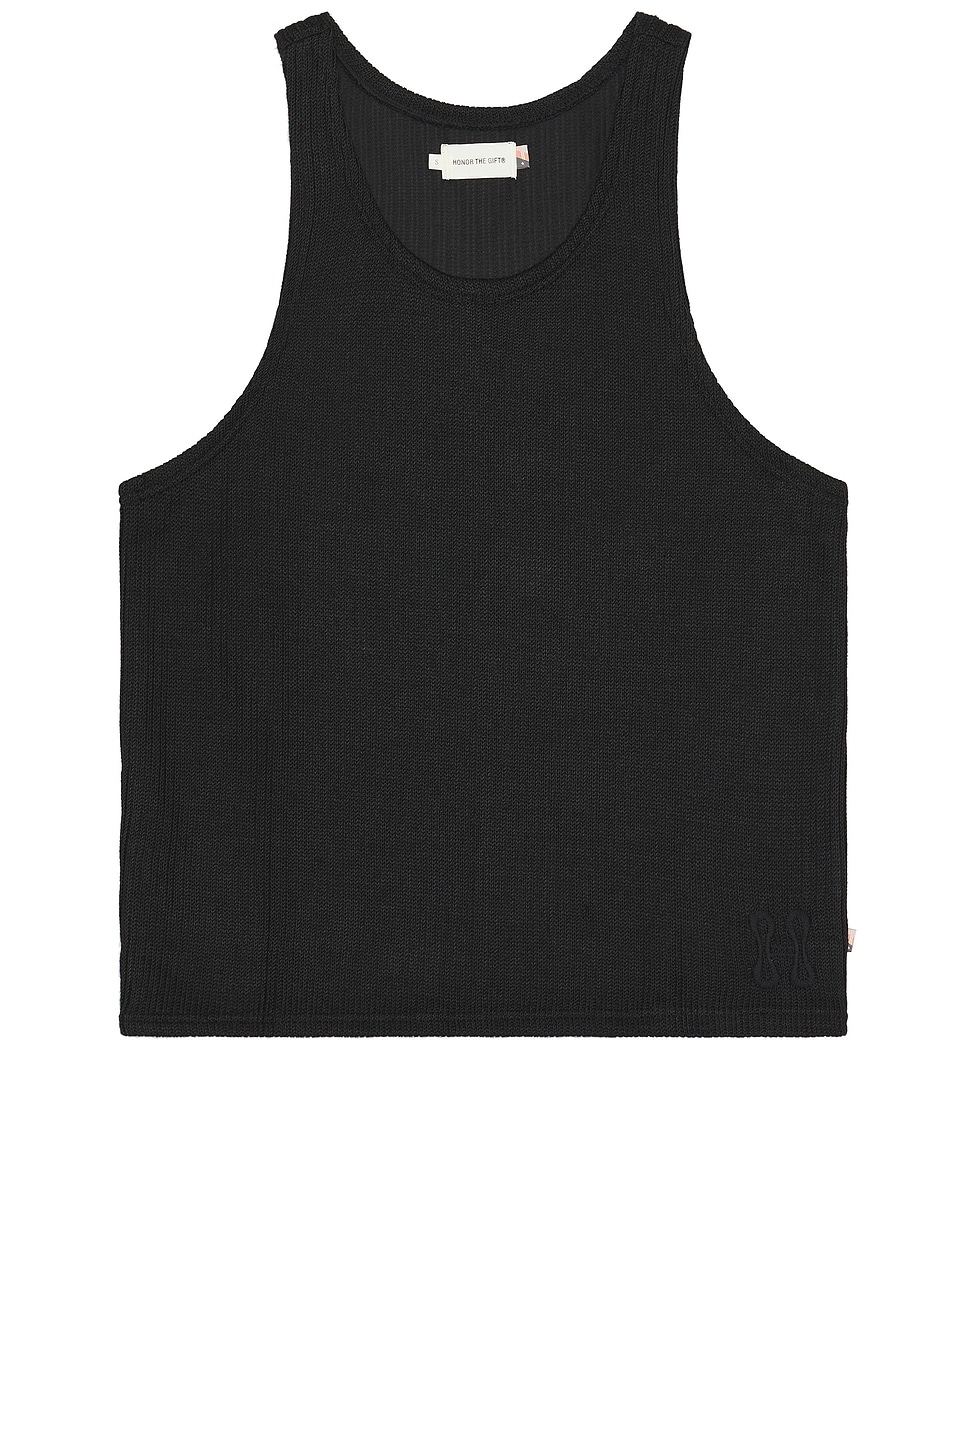 Image 1 of Honor The Gift Knit Tank Top in Black